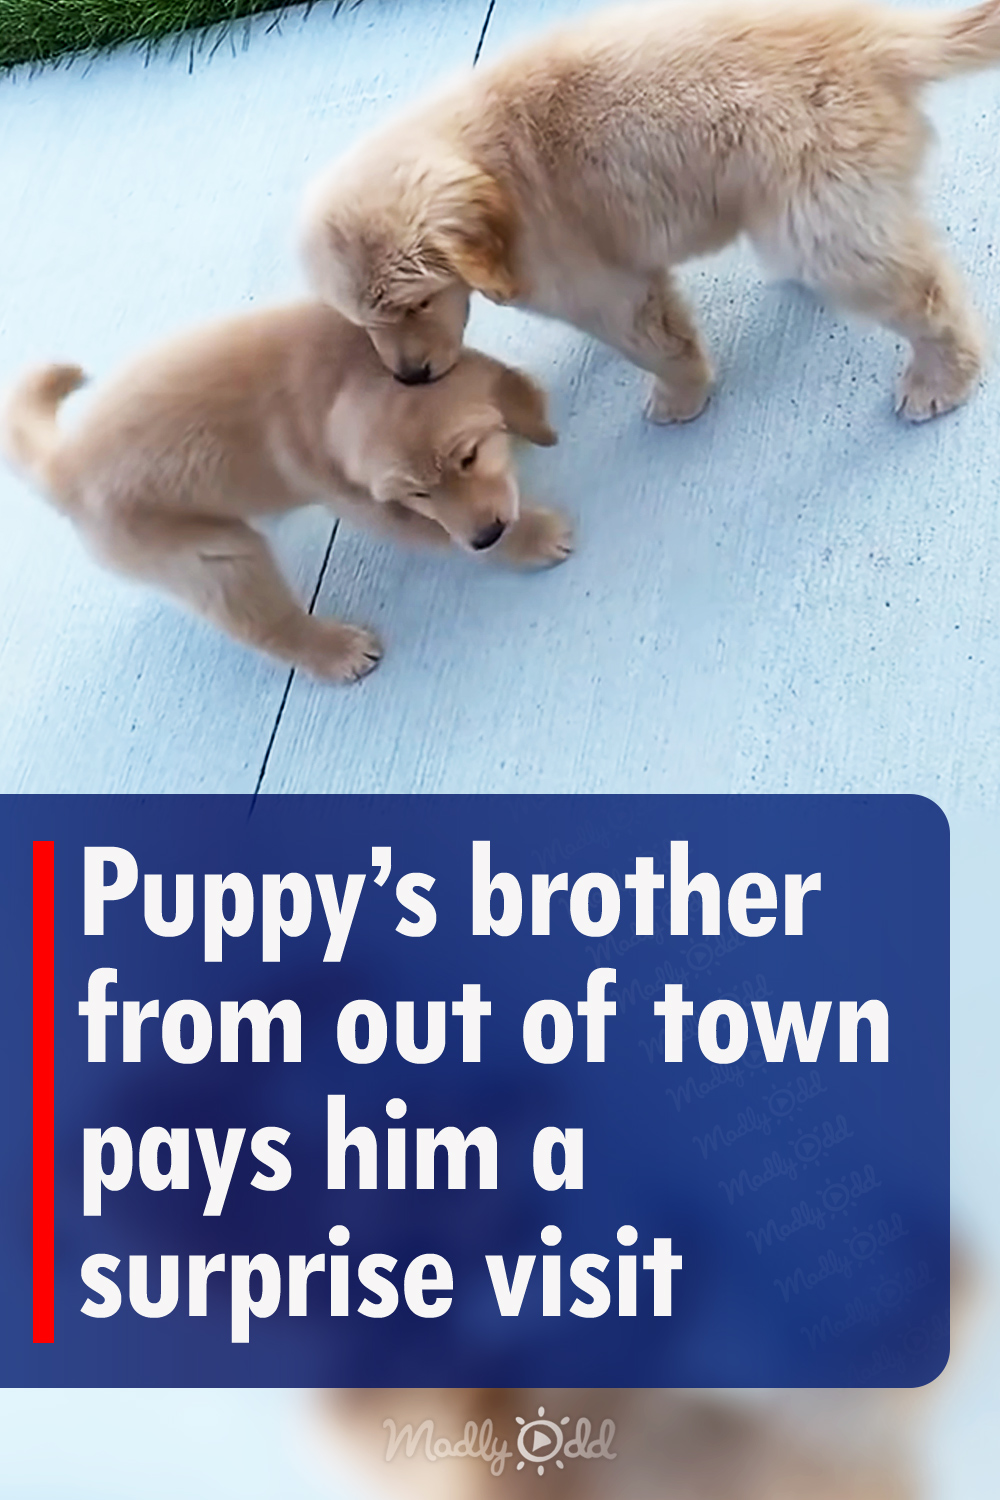 Puppy’s brother from out of town pays him a surprise visit